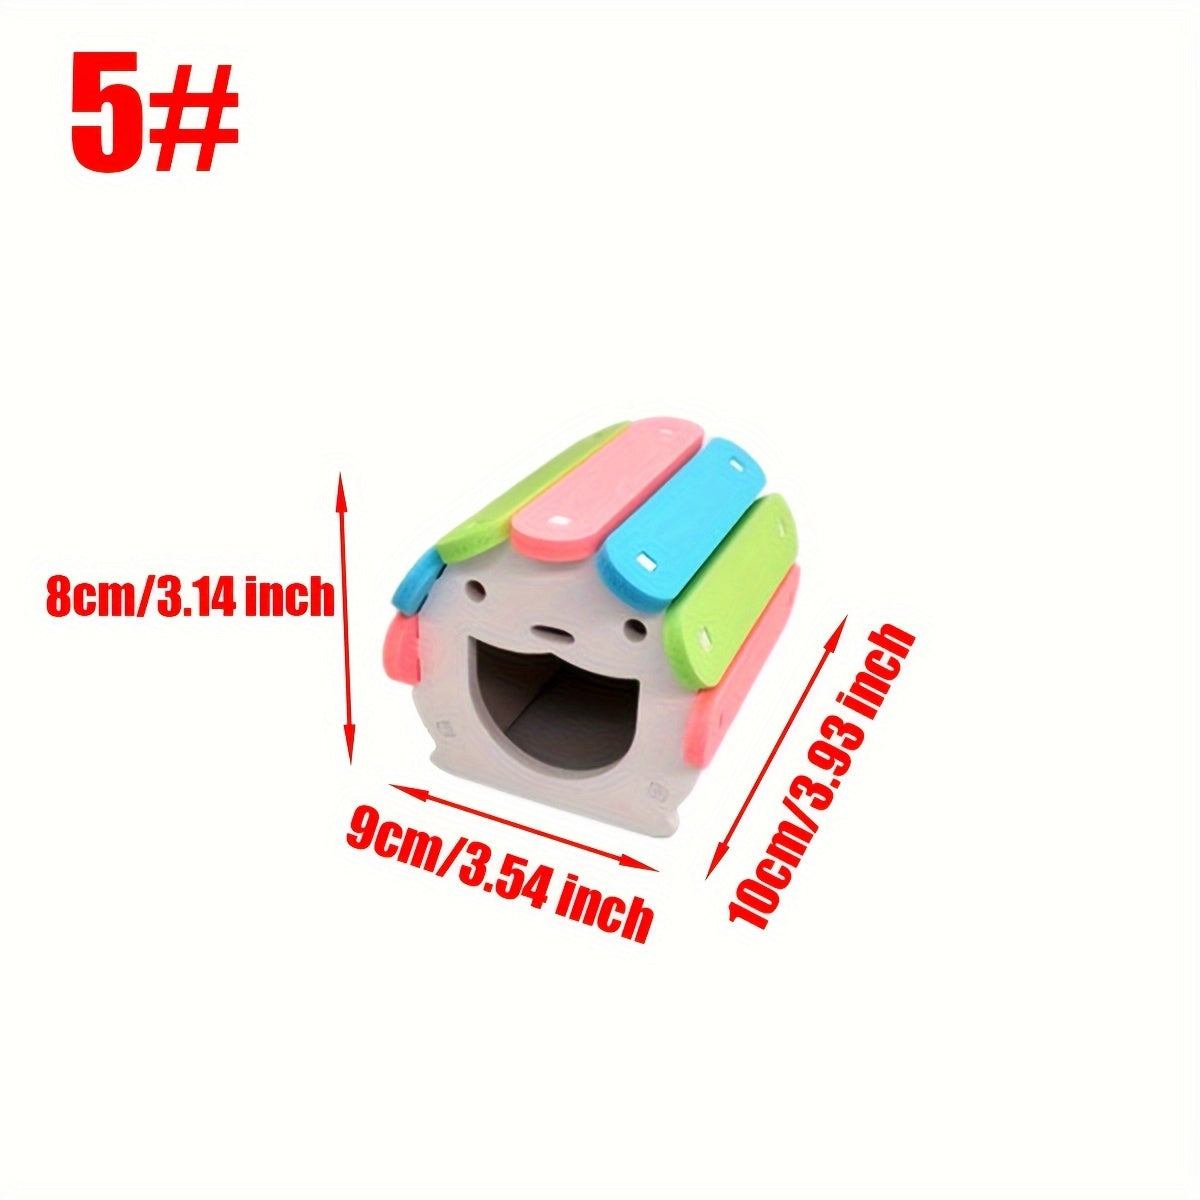 1pc Colorful Hamster Toy, Hamster House, Hamster DIY Cage Accessories, Used For Climbing And Playing